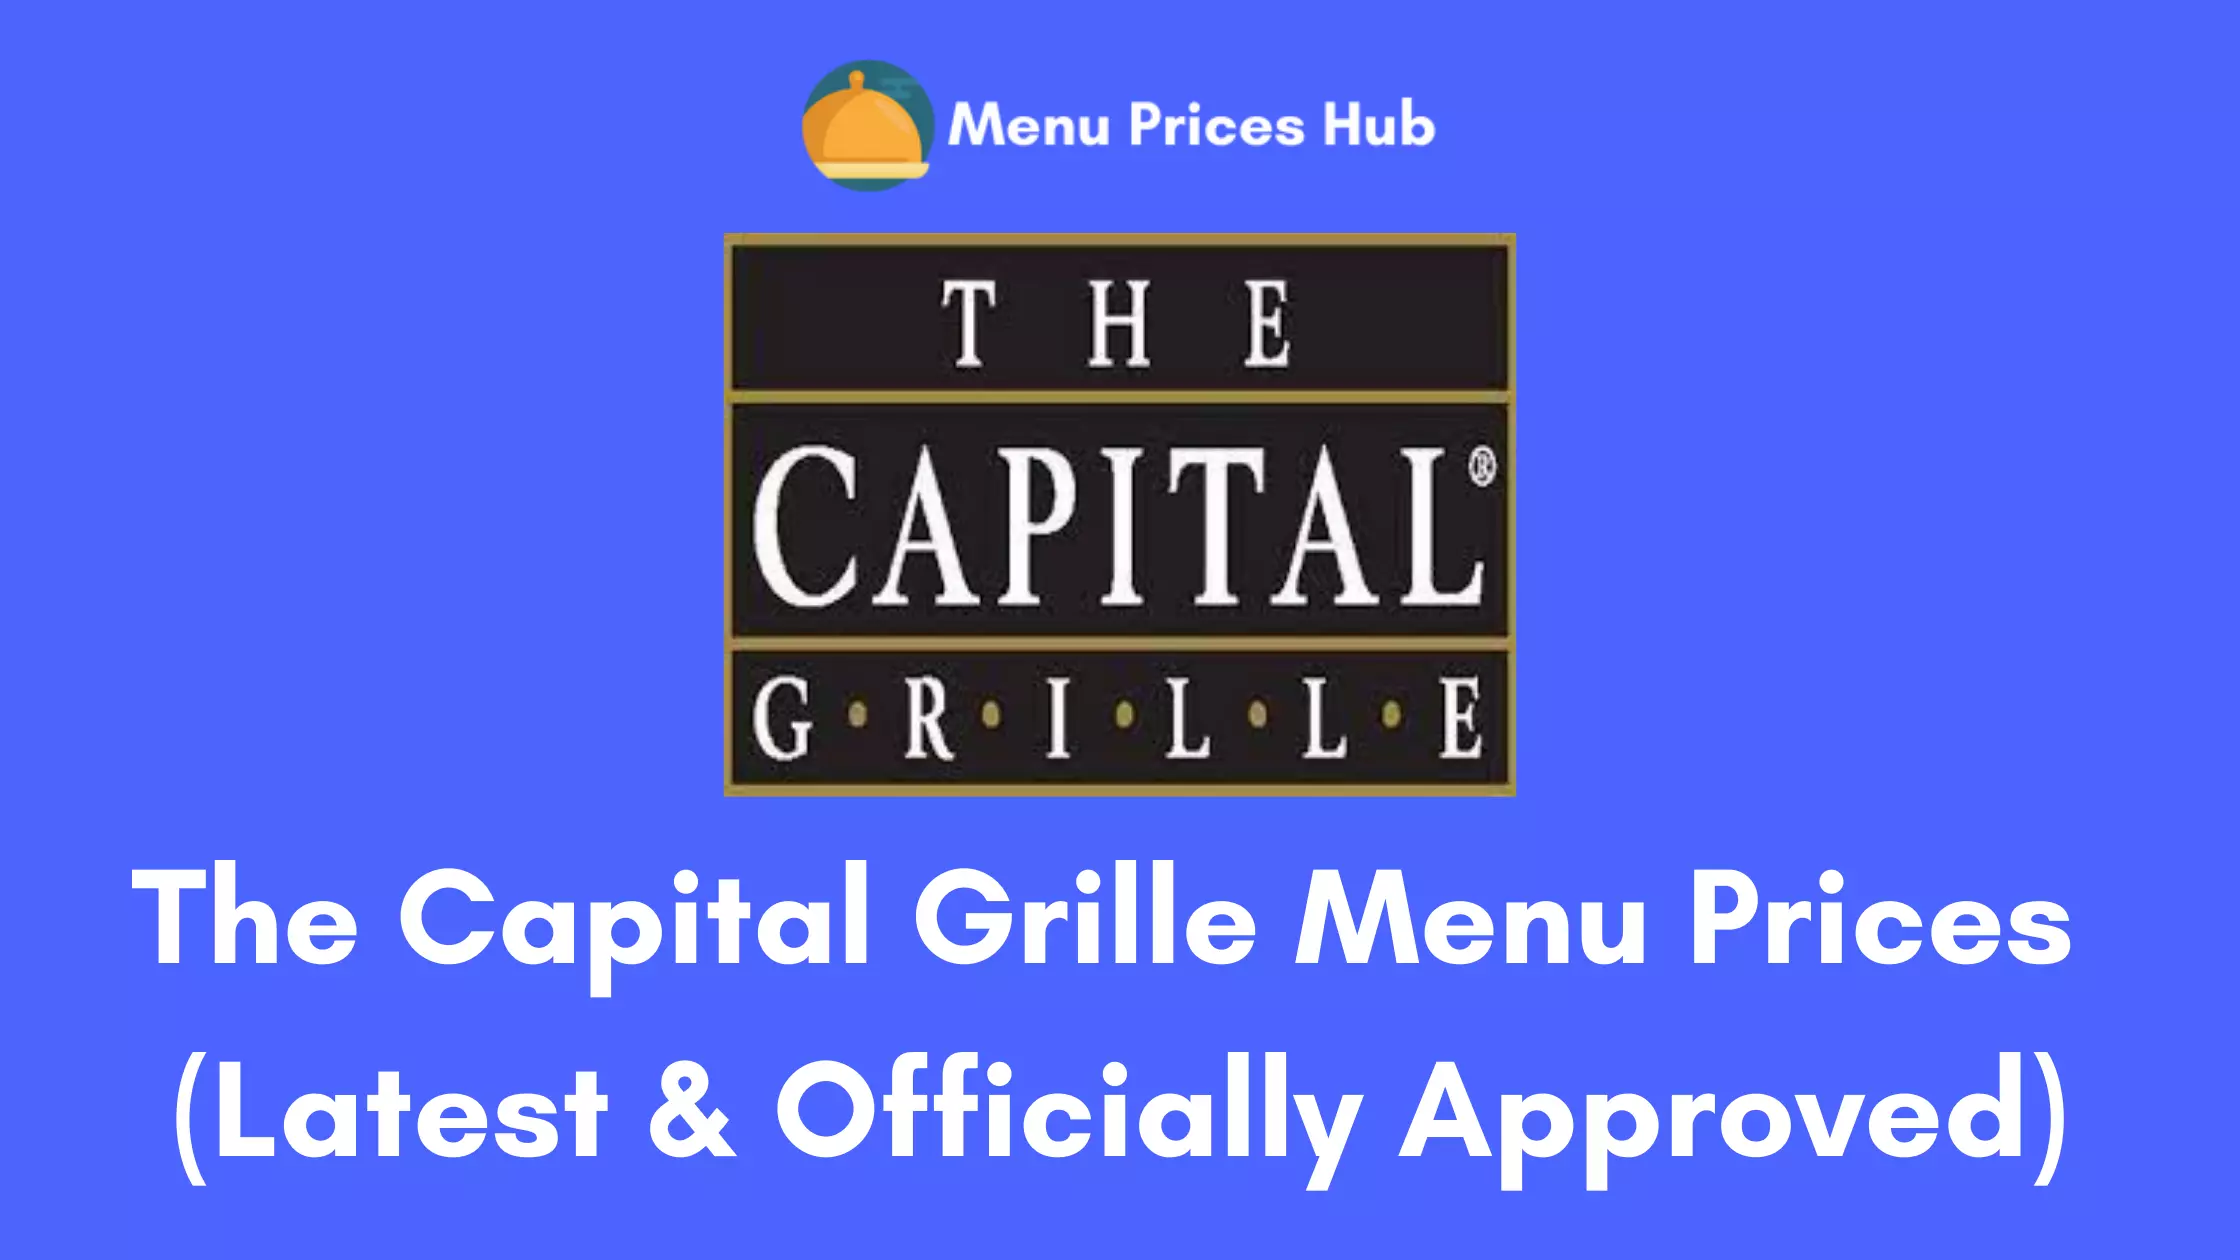 The Capital Grille Menu Prices